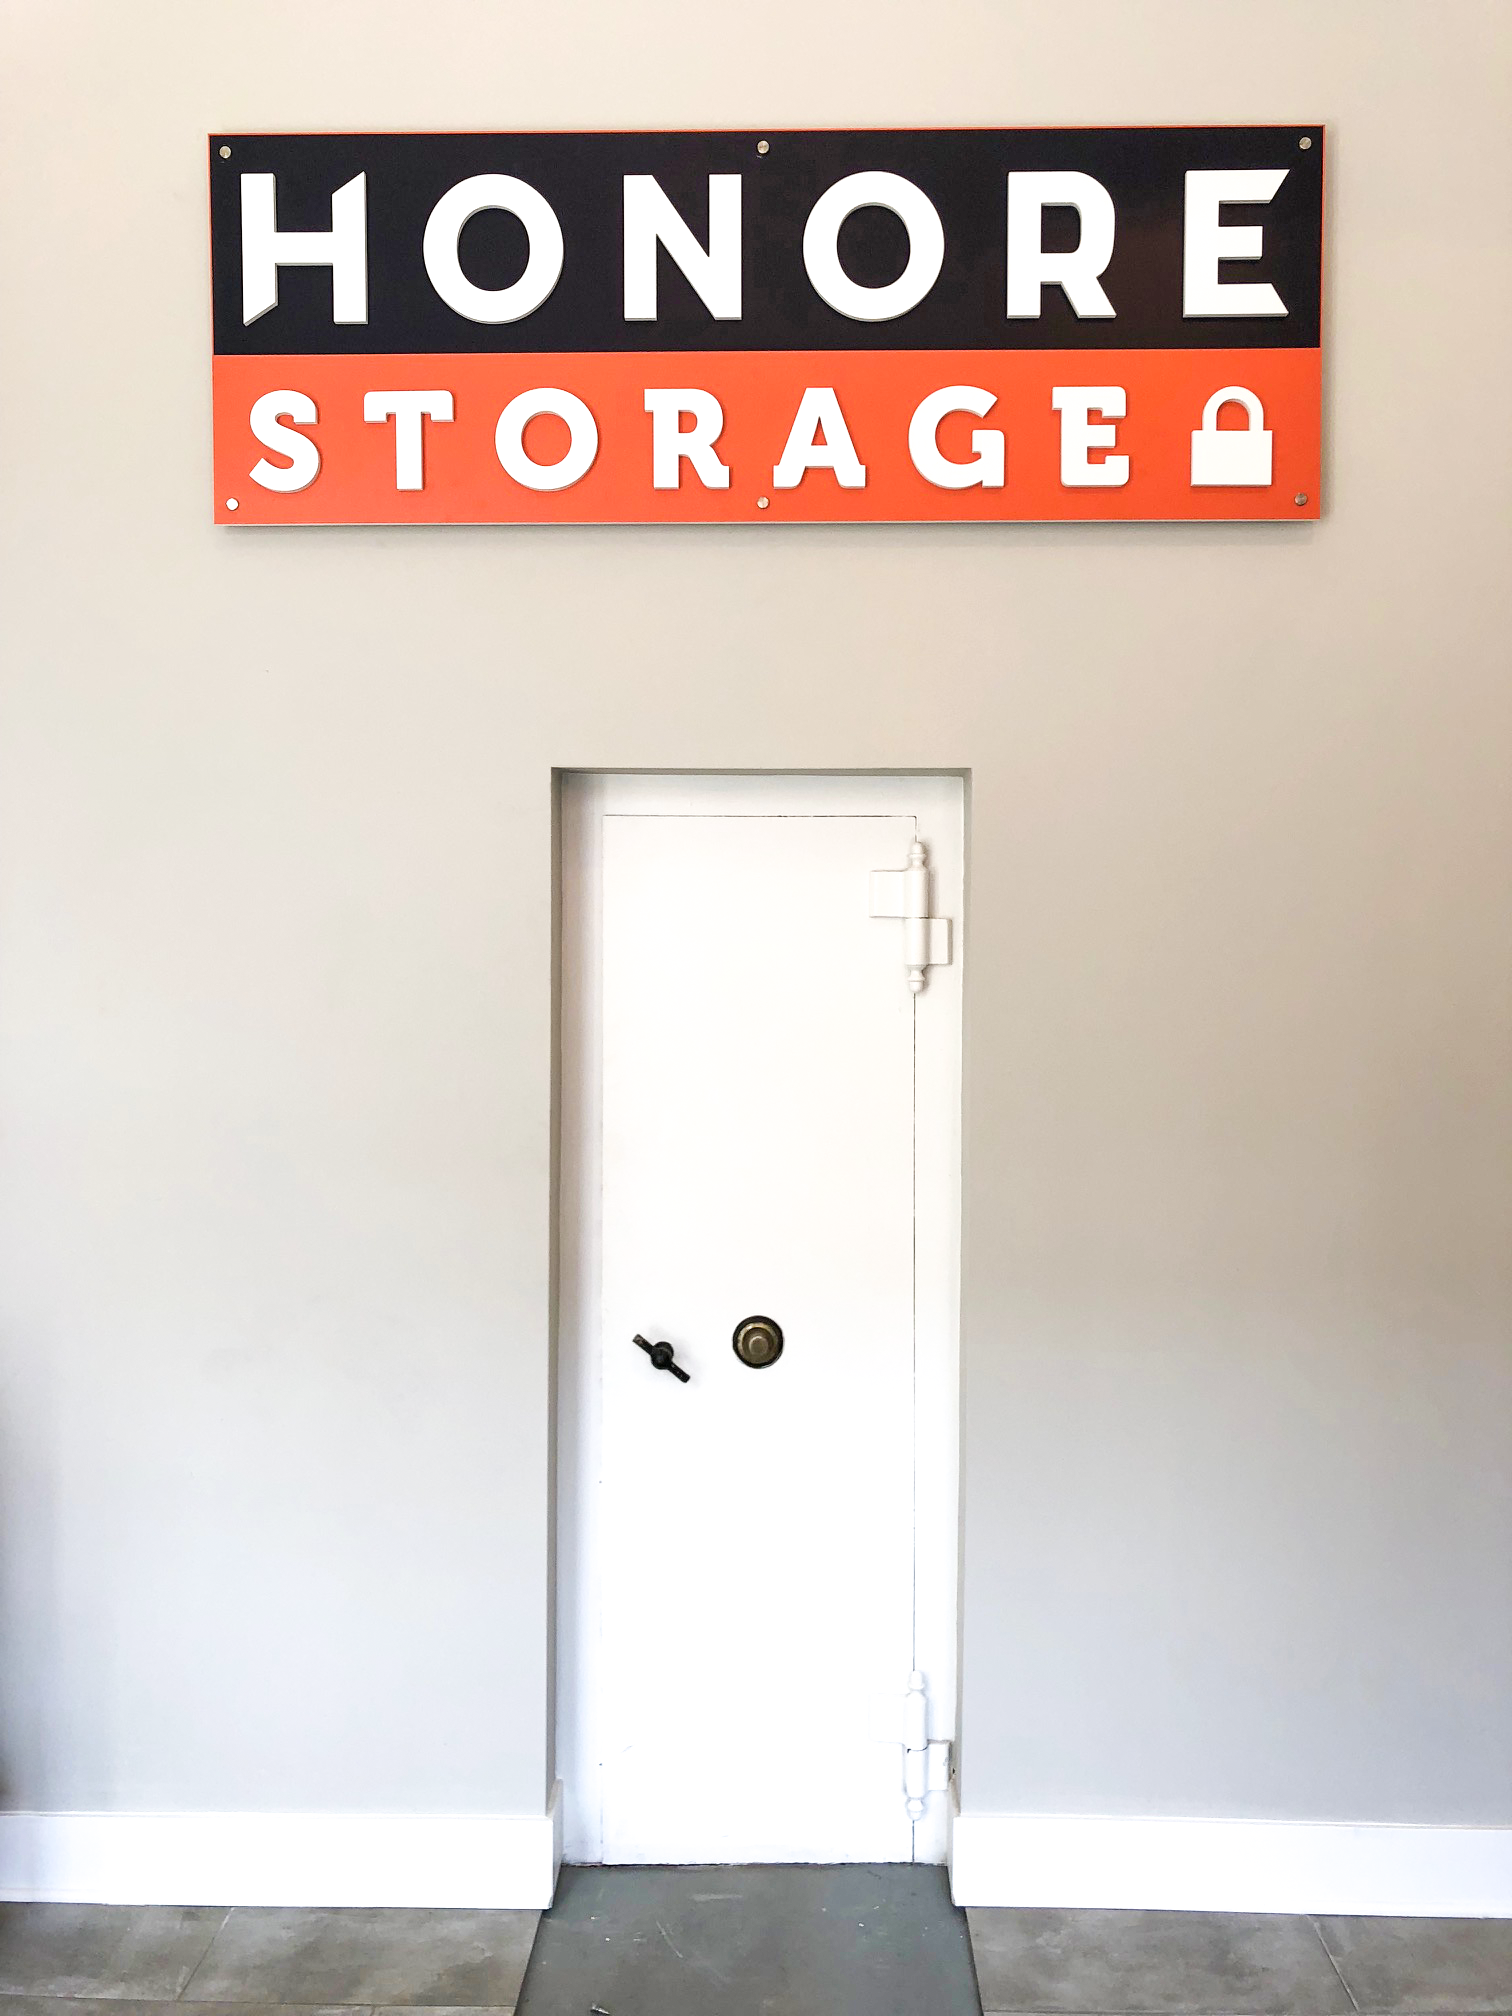 Promotional signage custom made for Honore Storage